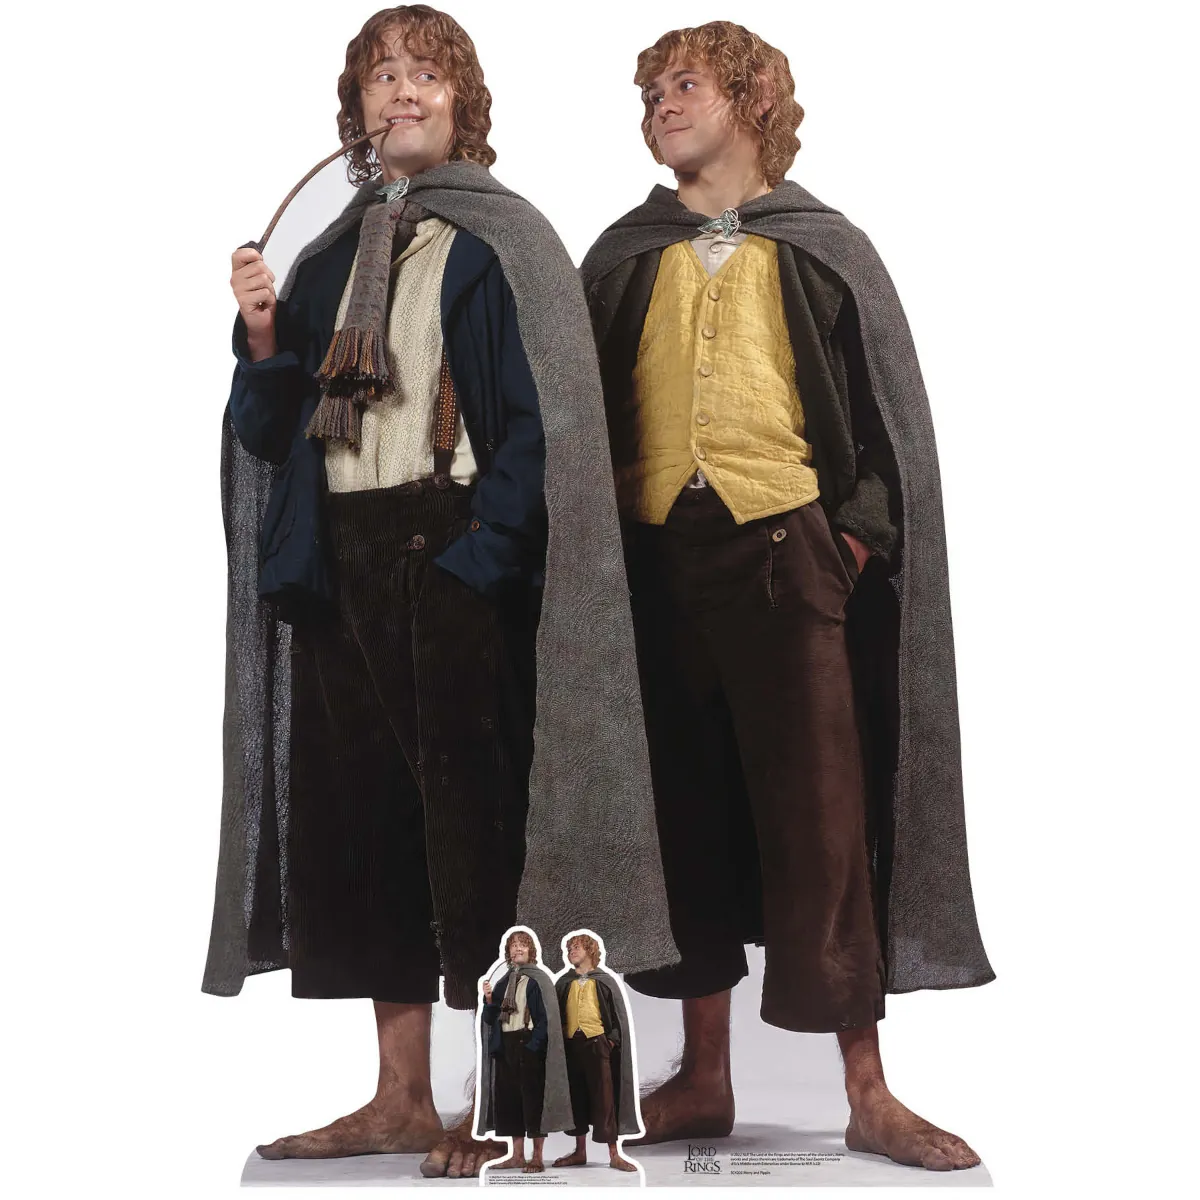 SC4202 Pippin & Merry (The Lord of the Rings) Double Lifesize + Mini Cardboard Cutout Standee Front